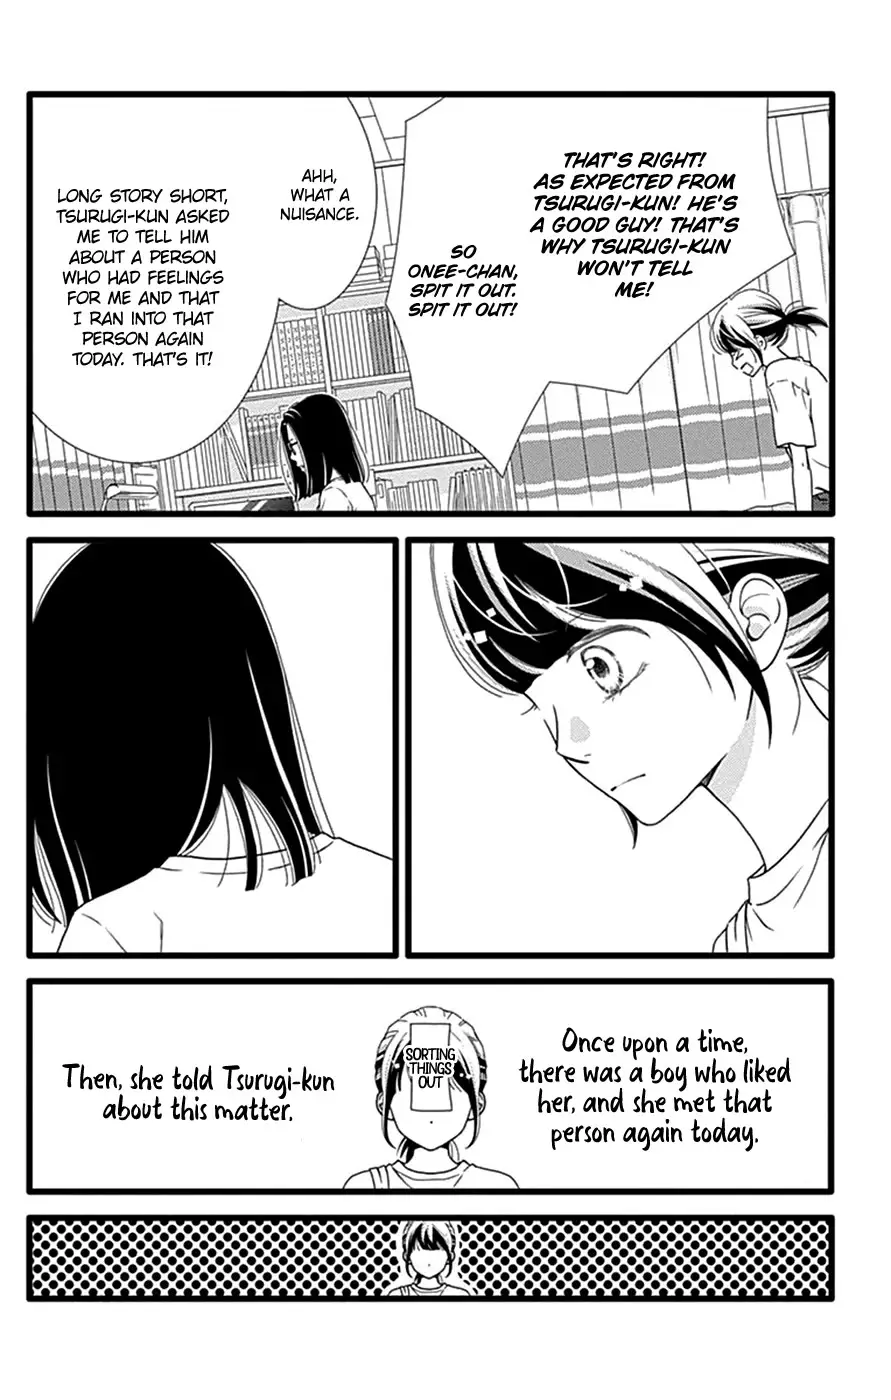 What An Average Way Koiko Goes! - 43 page 7-538c9bd3